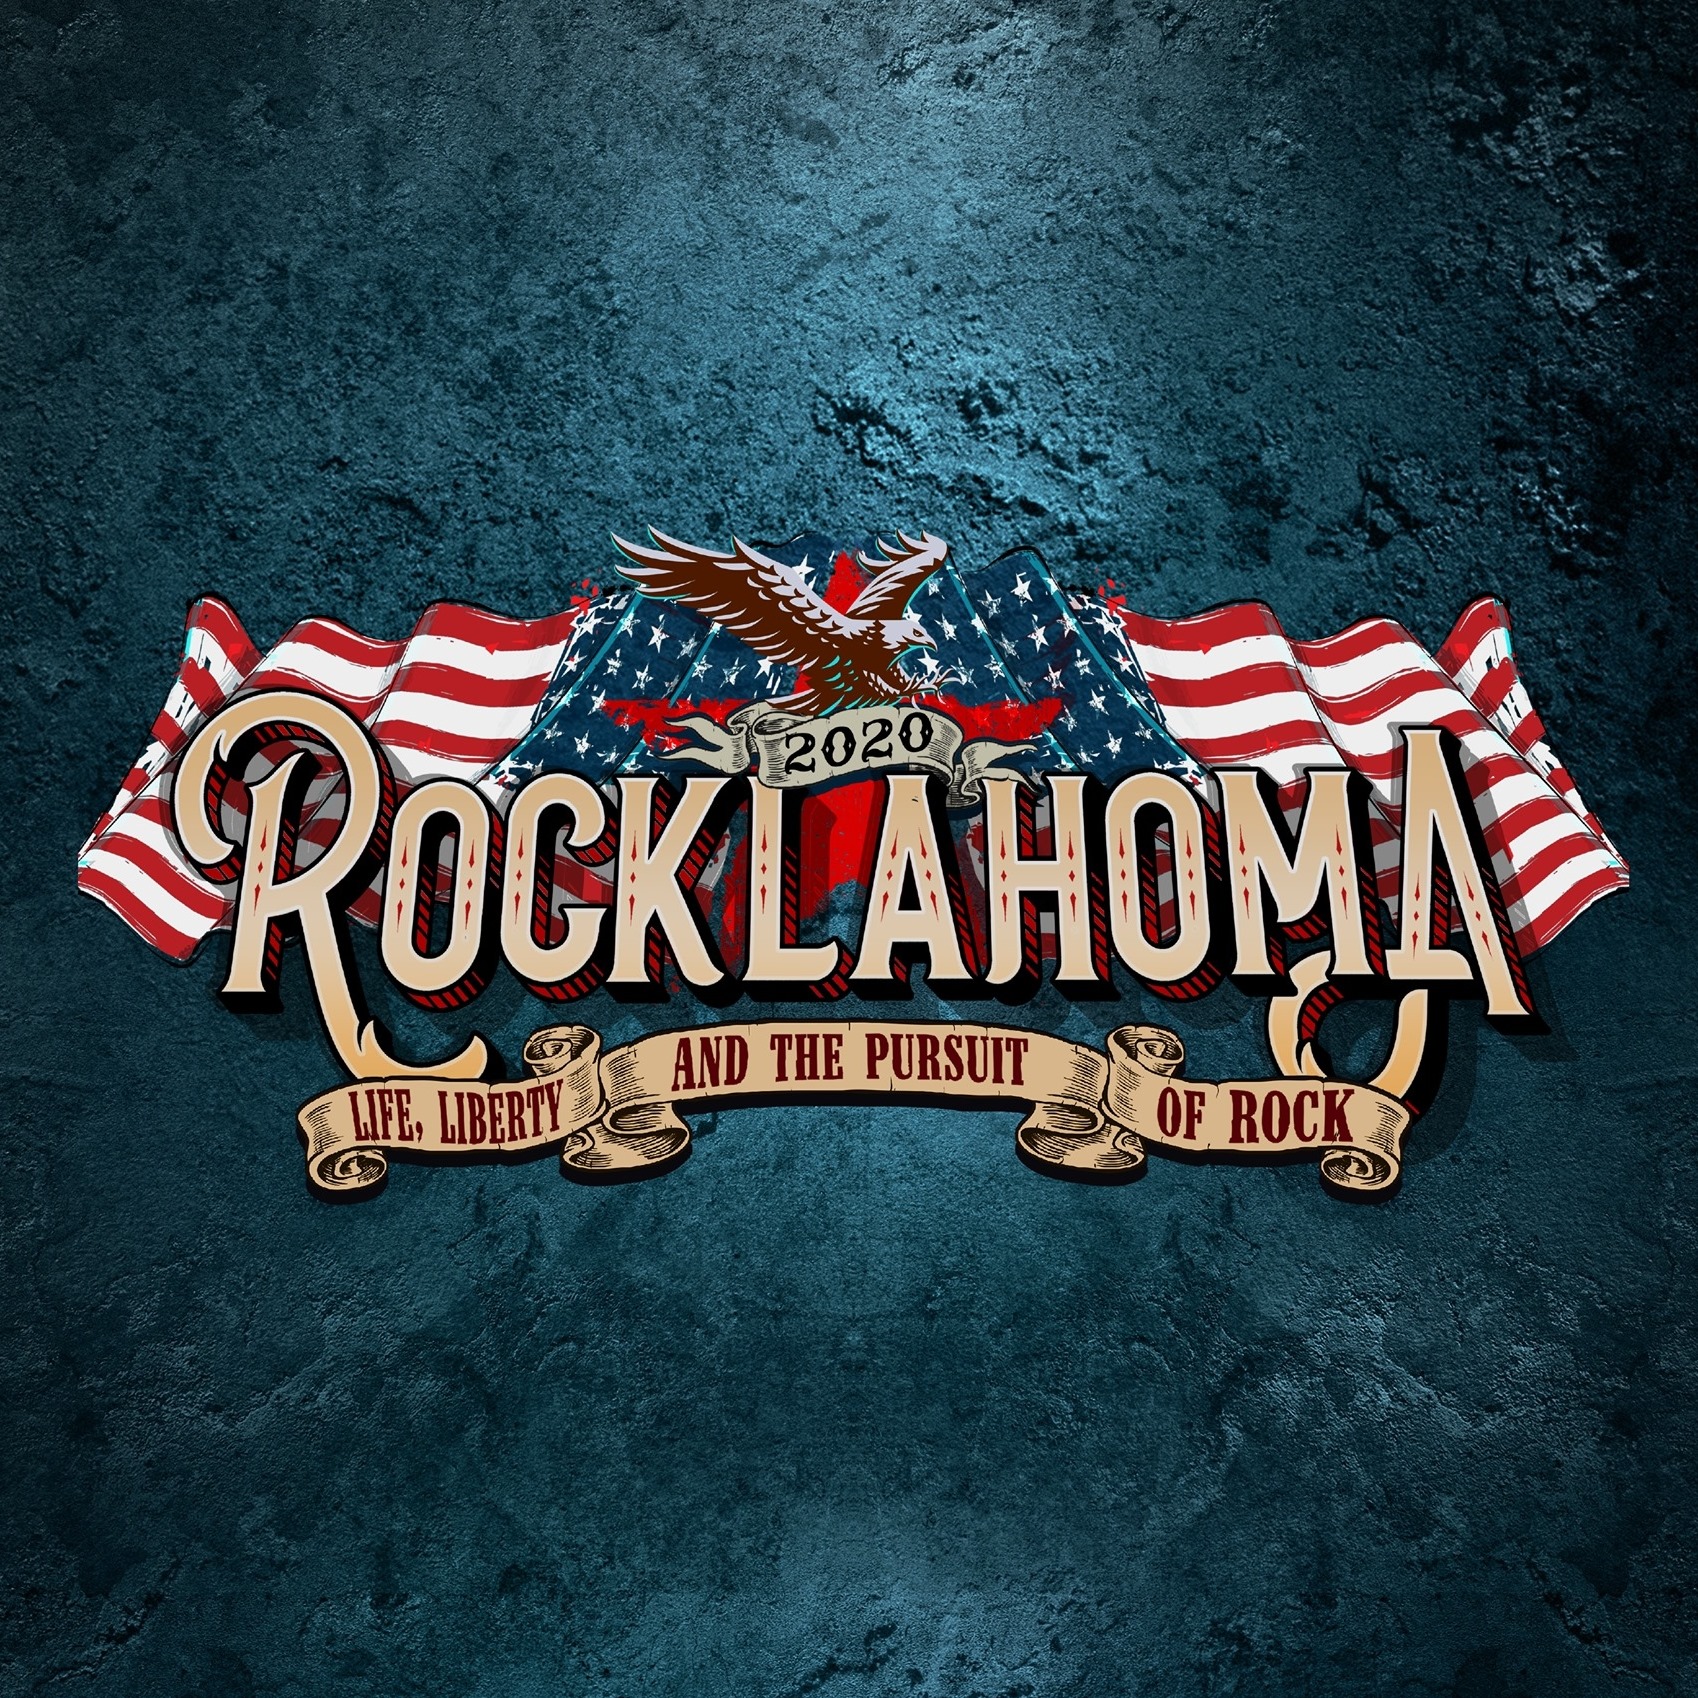 Rocklahoma 2020 Lineup Announced: Slipknot, Five Finger Death Punch, Staind To Headline